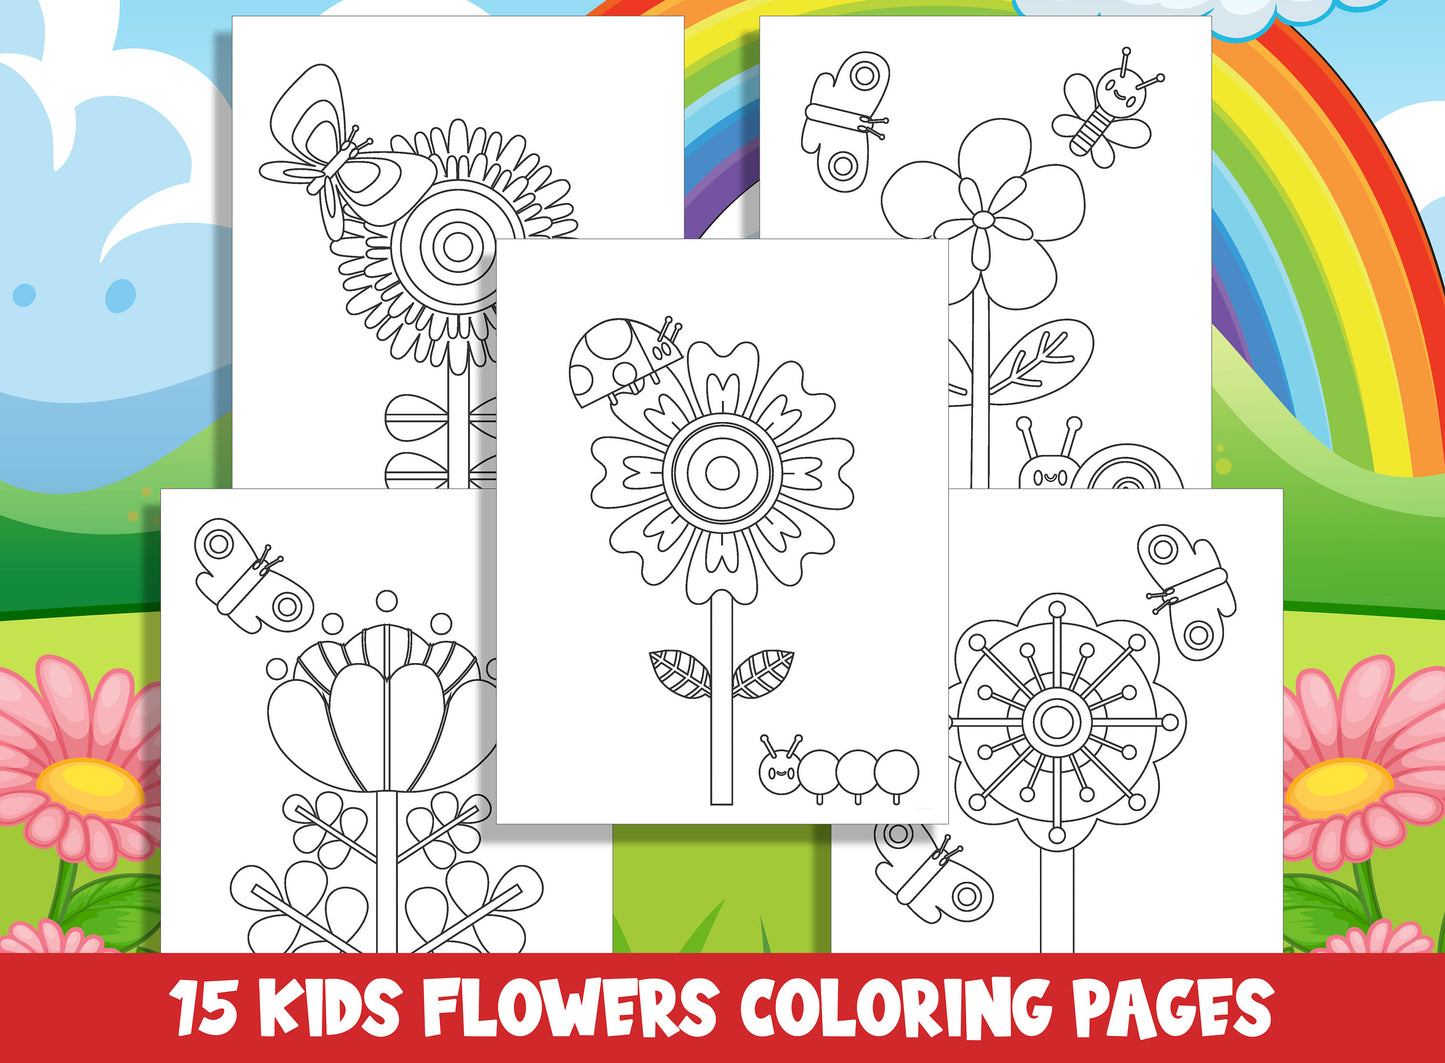 Blooming Beauty: Kids Flowers Coloring Pages for Spring and Summer Garden, 15 Pages, PDF File, Instant Download